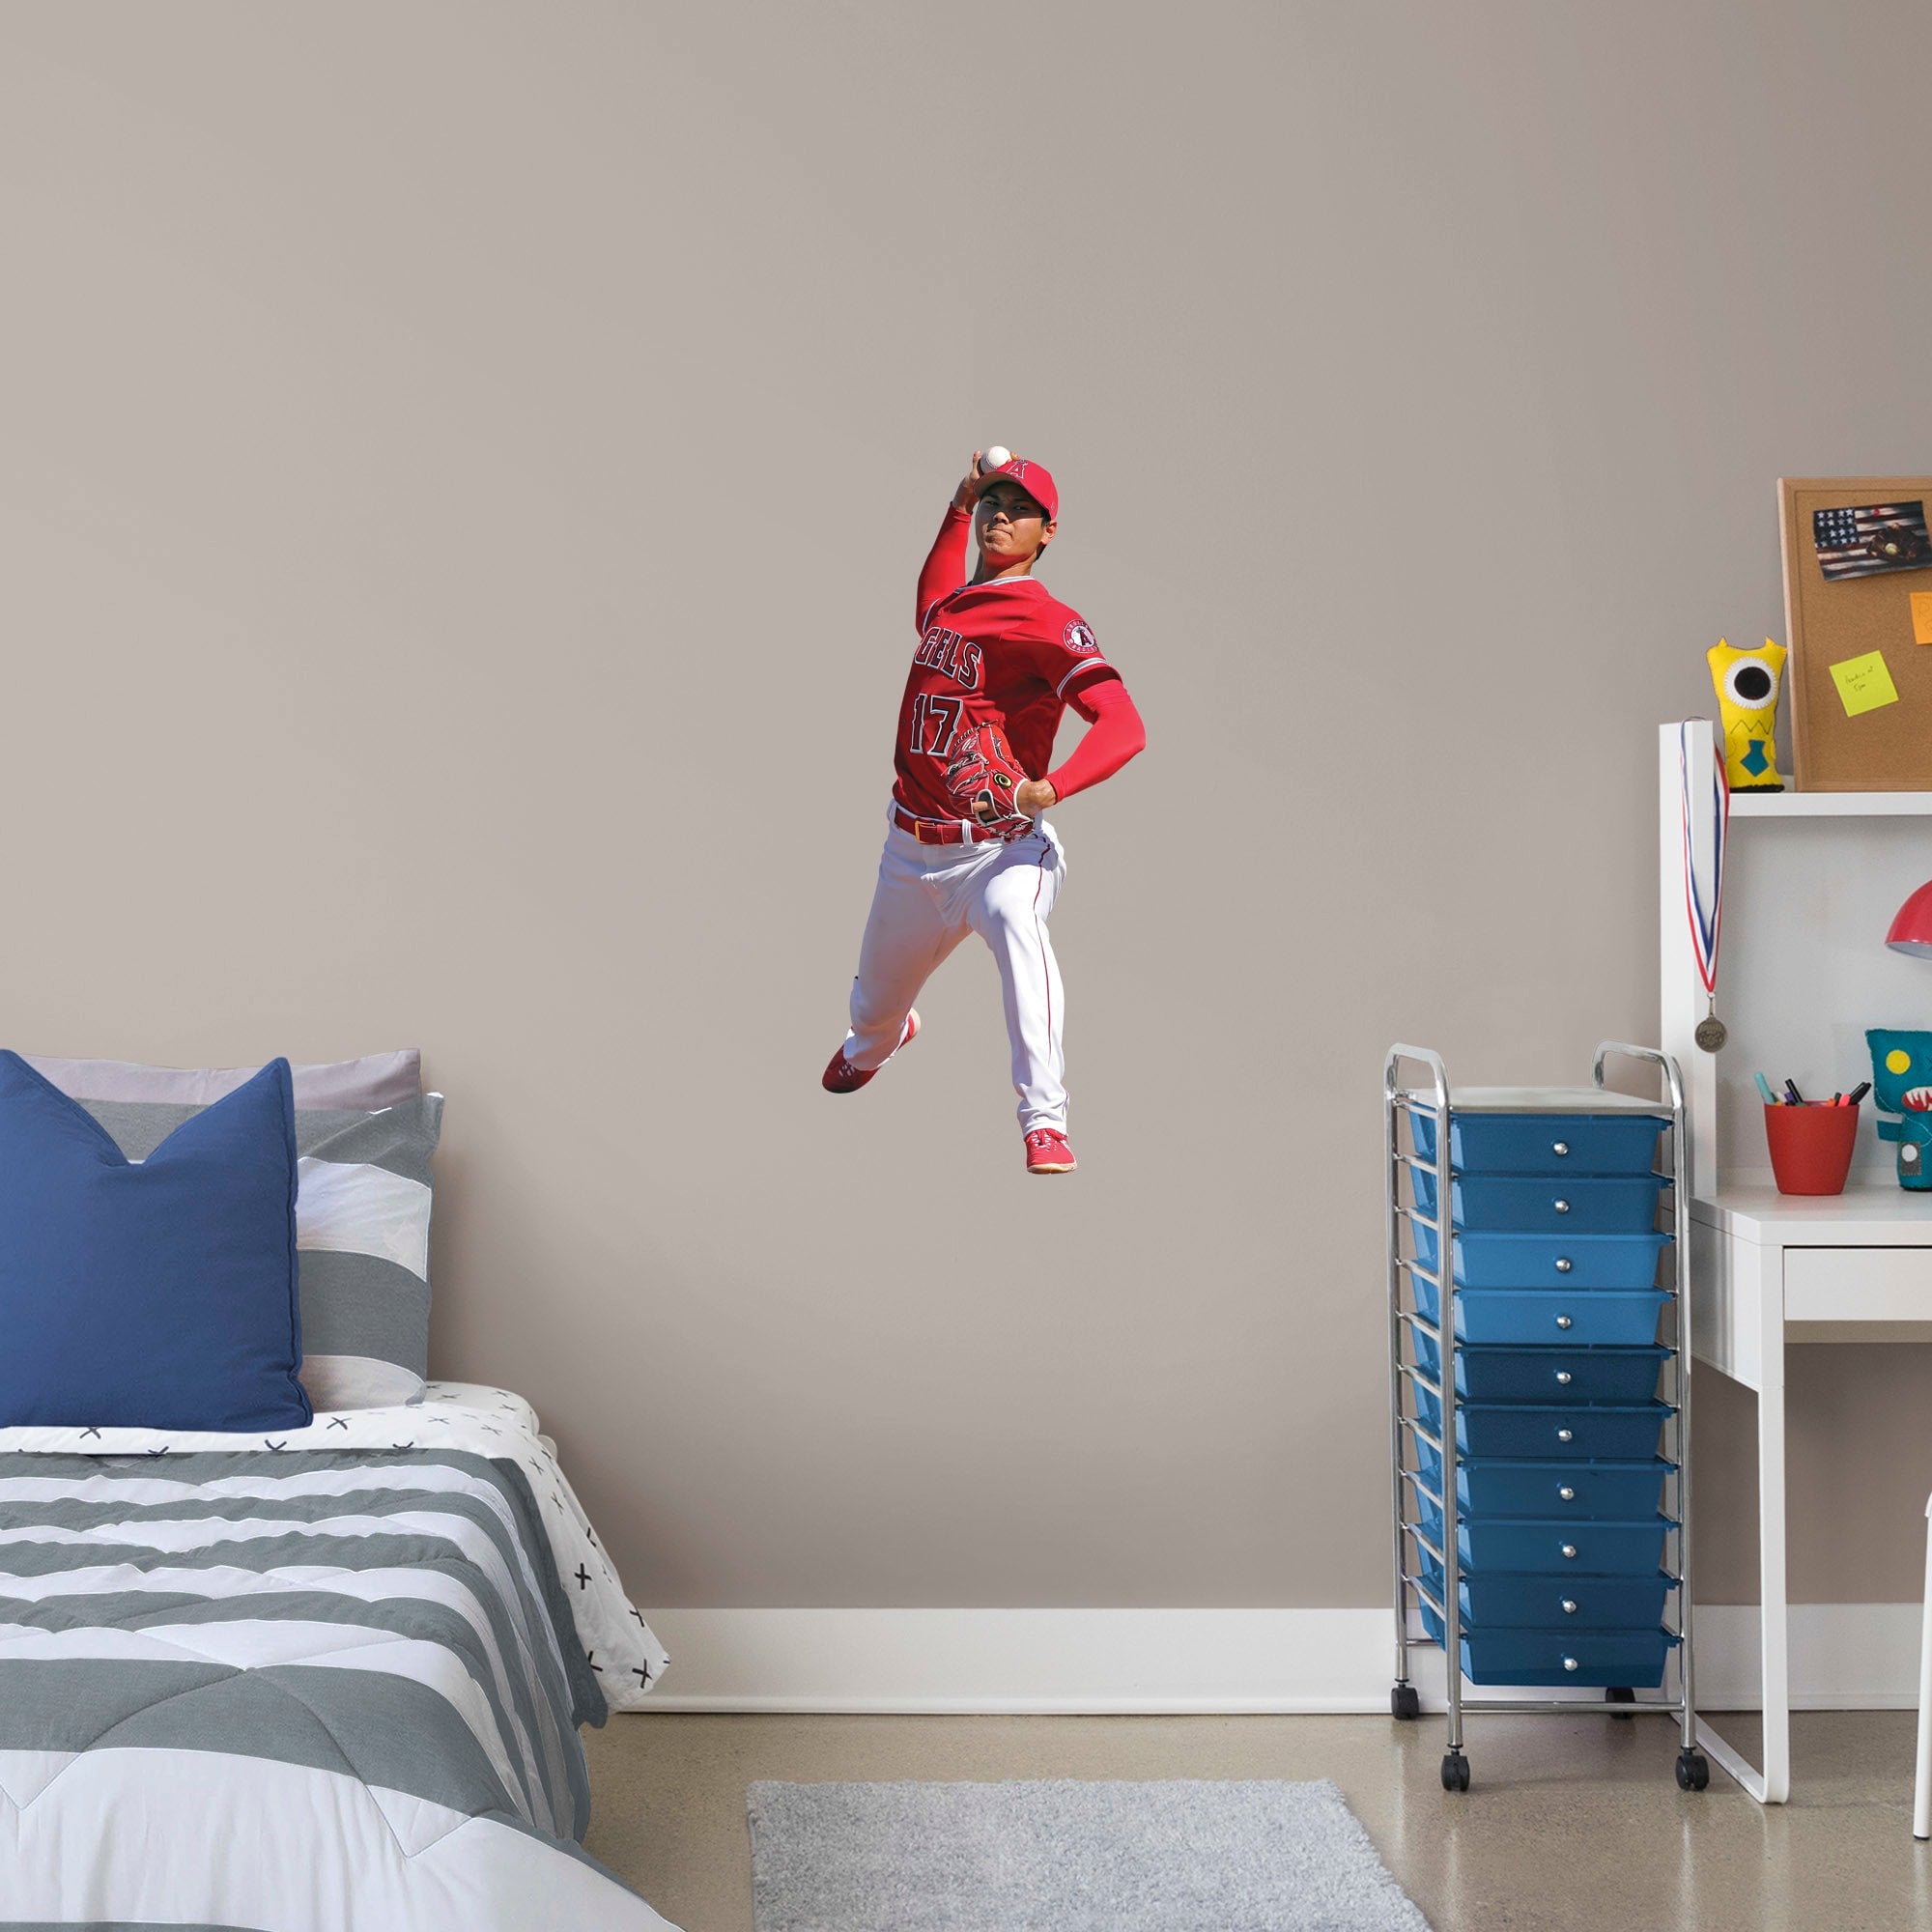 Shohei Ohtani for LA Angels - Officially Licensed MLB Removable Wall Decal XL by Fathead | Vinyl